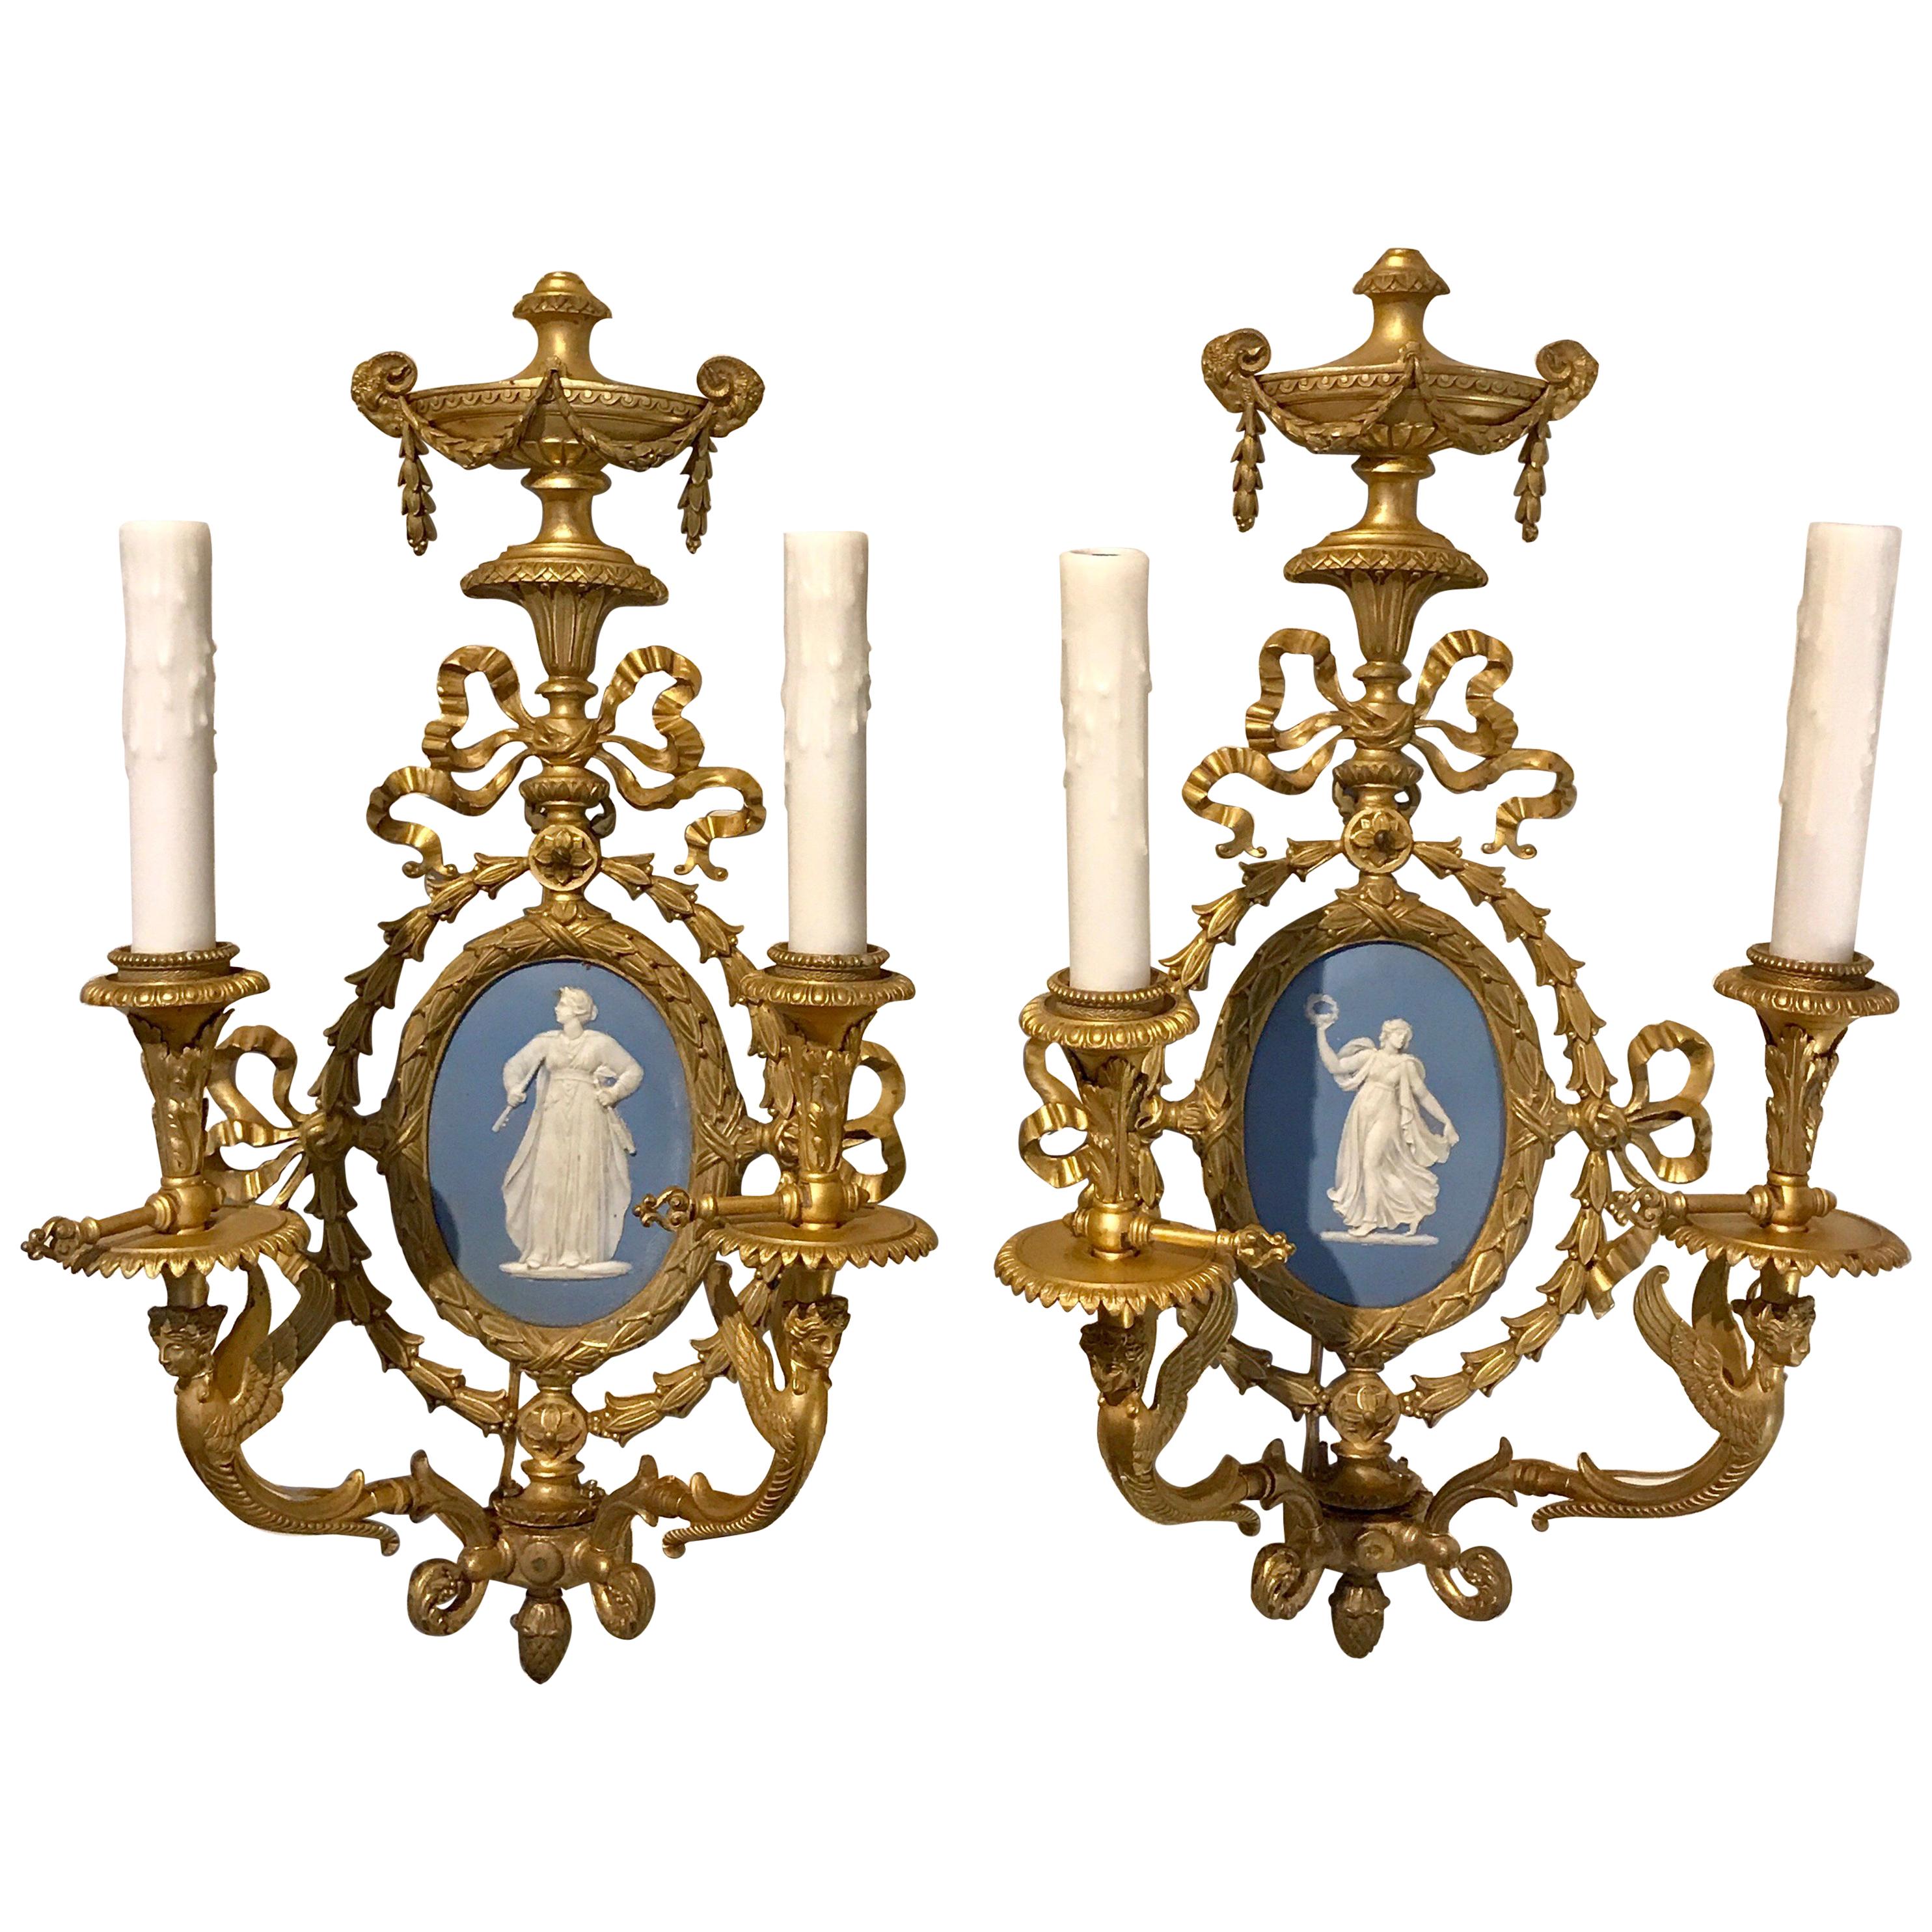 Pair of Exquisite Adam Style Ormolu Wall Sconces with Wedgwood Plaques For Sale